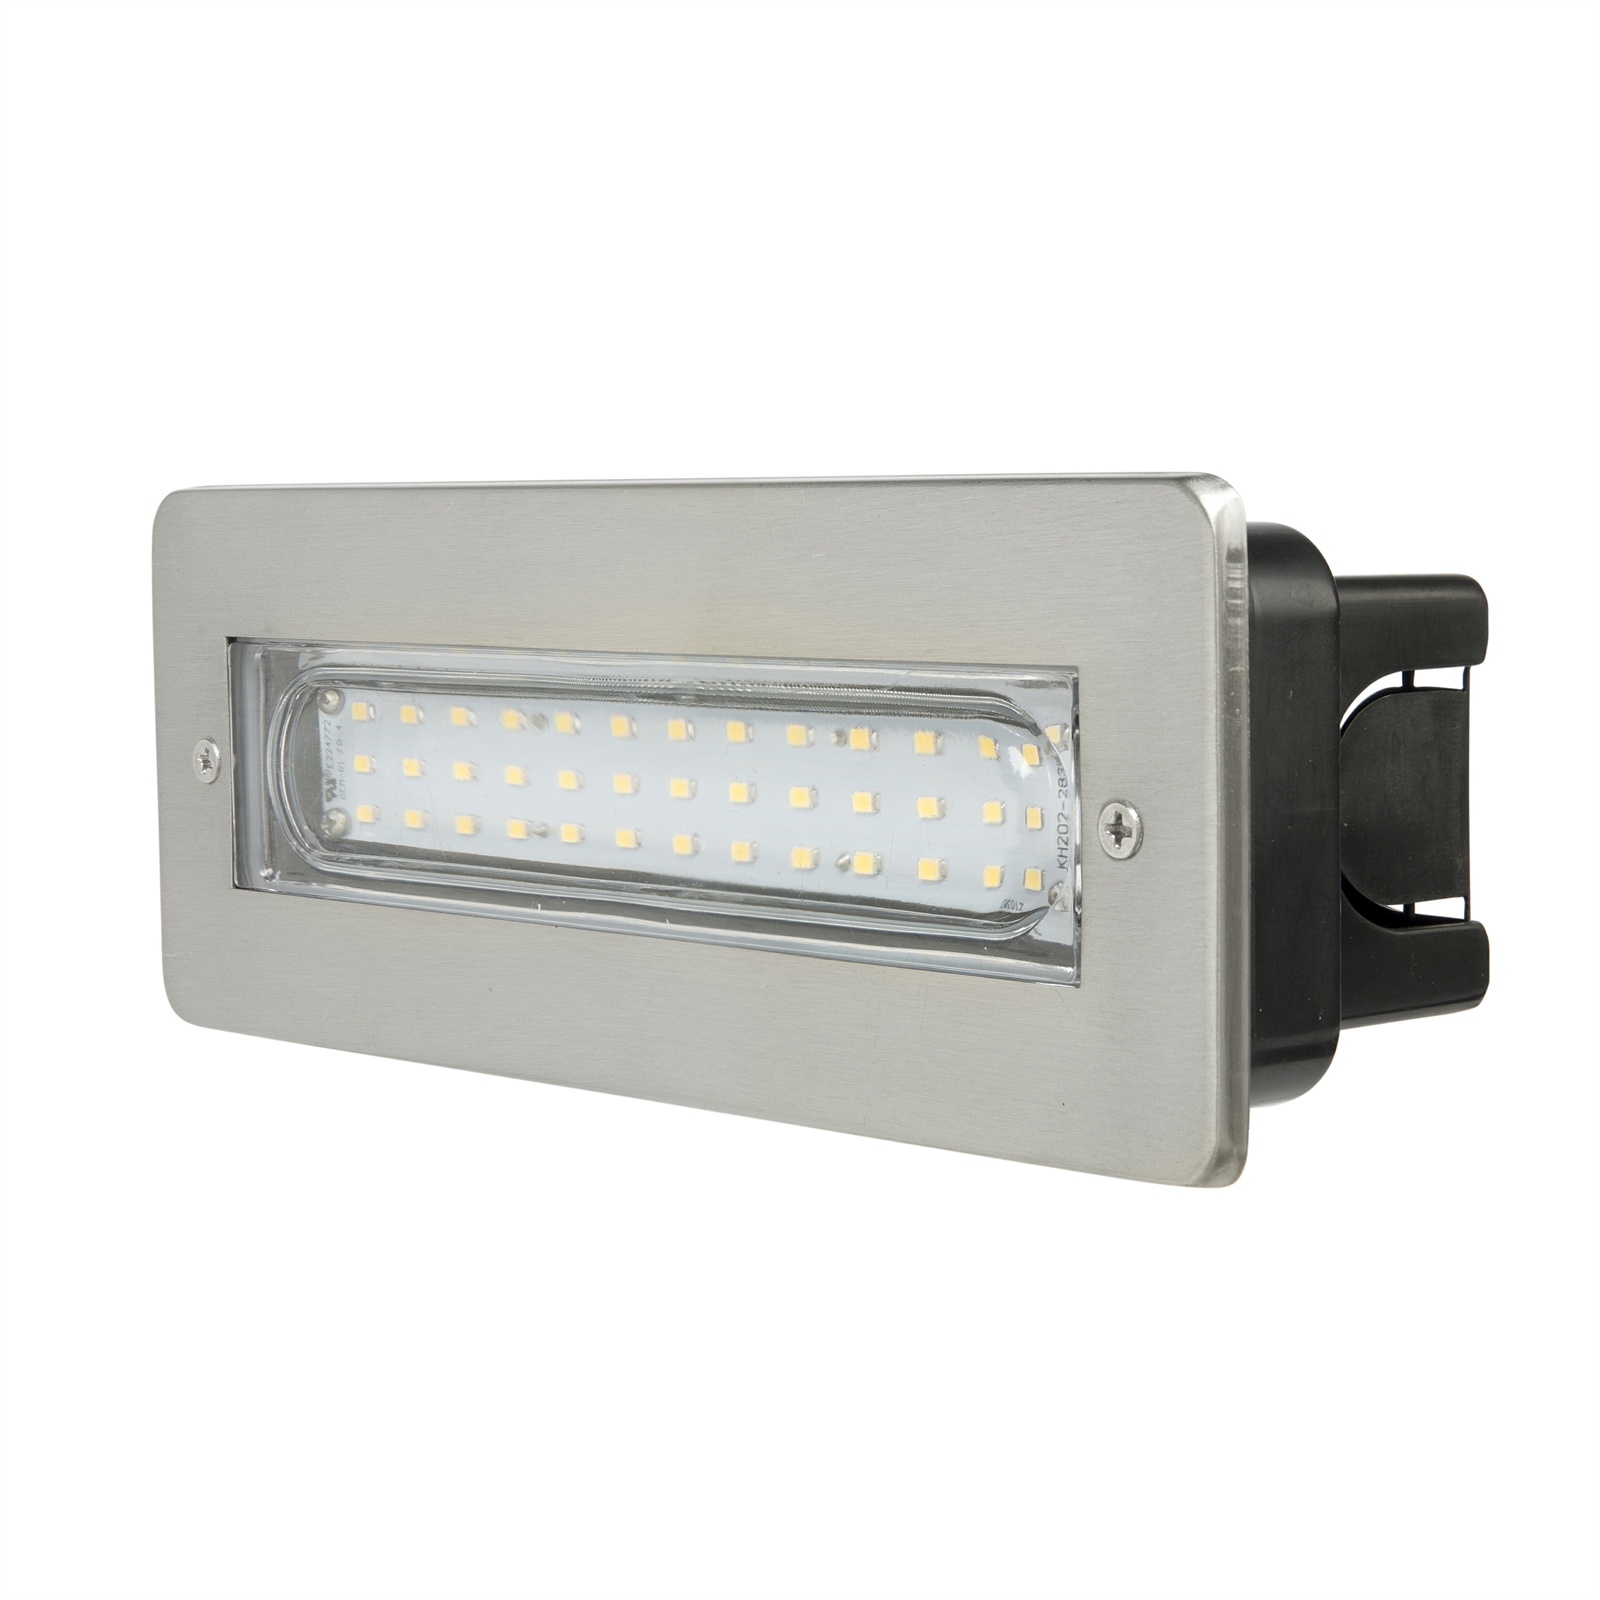 Brilliant Lighting 2W 240V Stainless Steel Newquay LED Wall Light